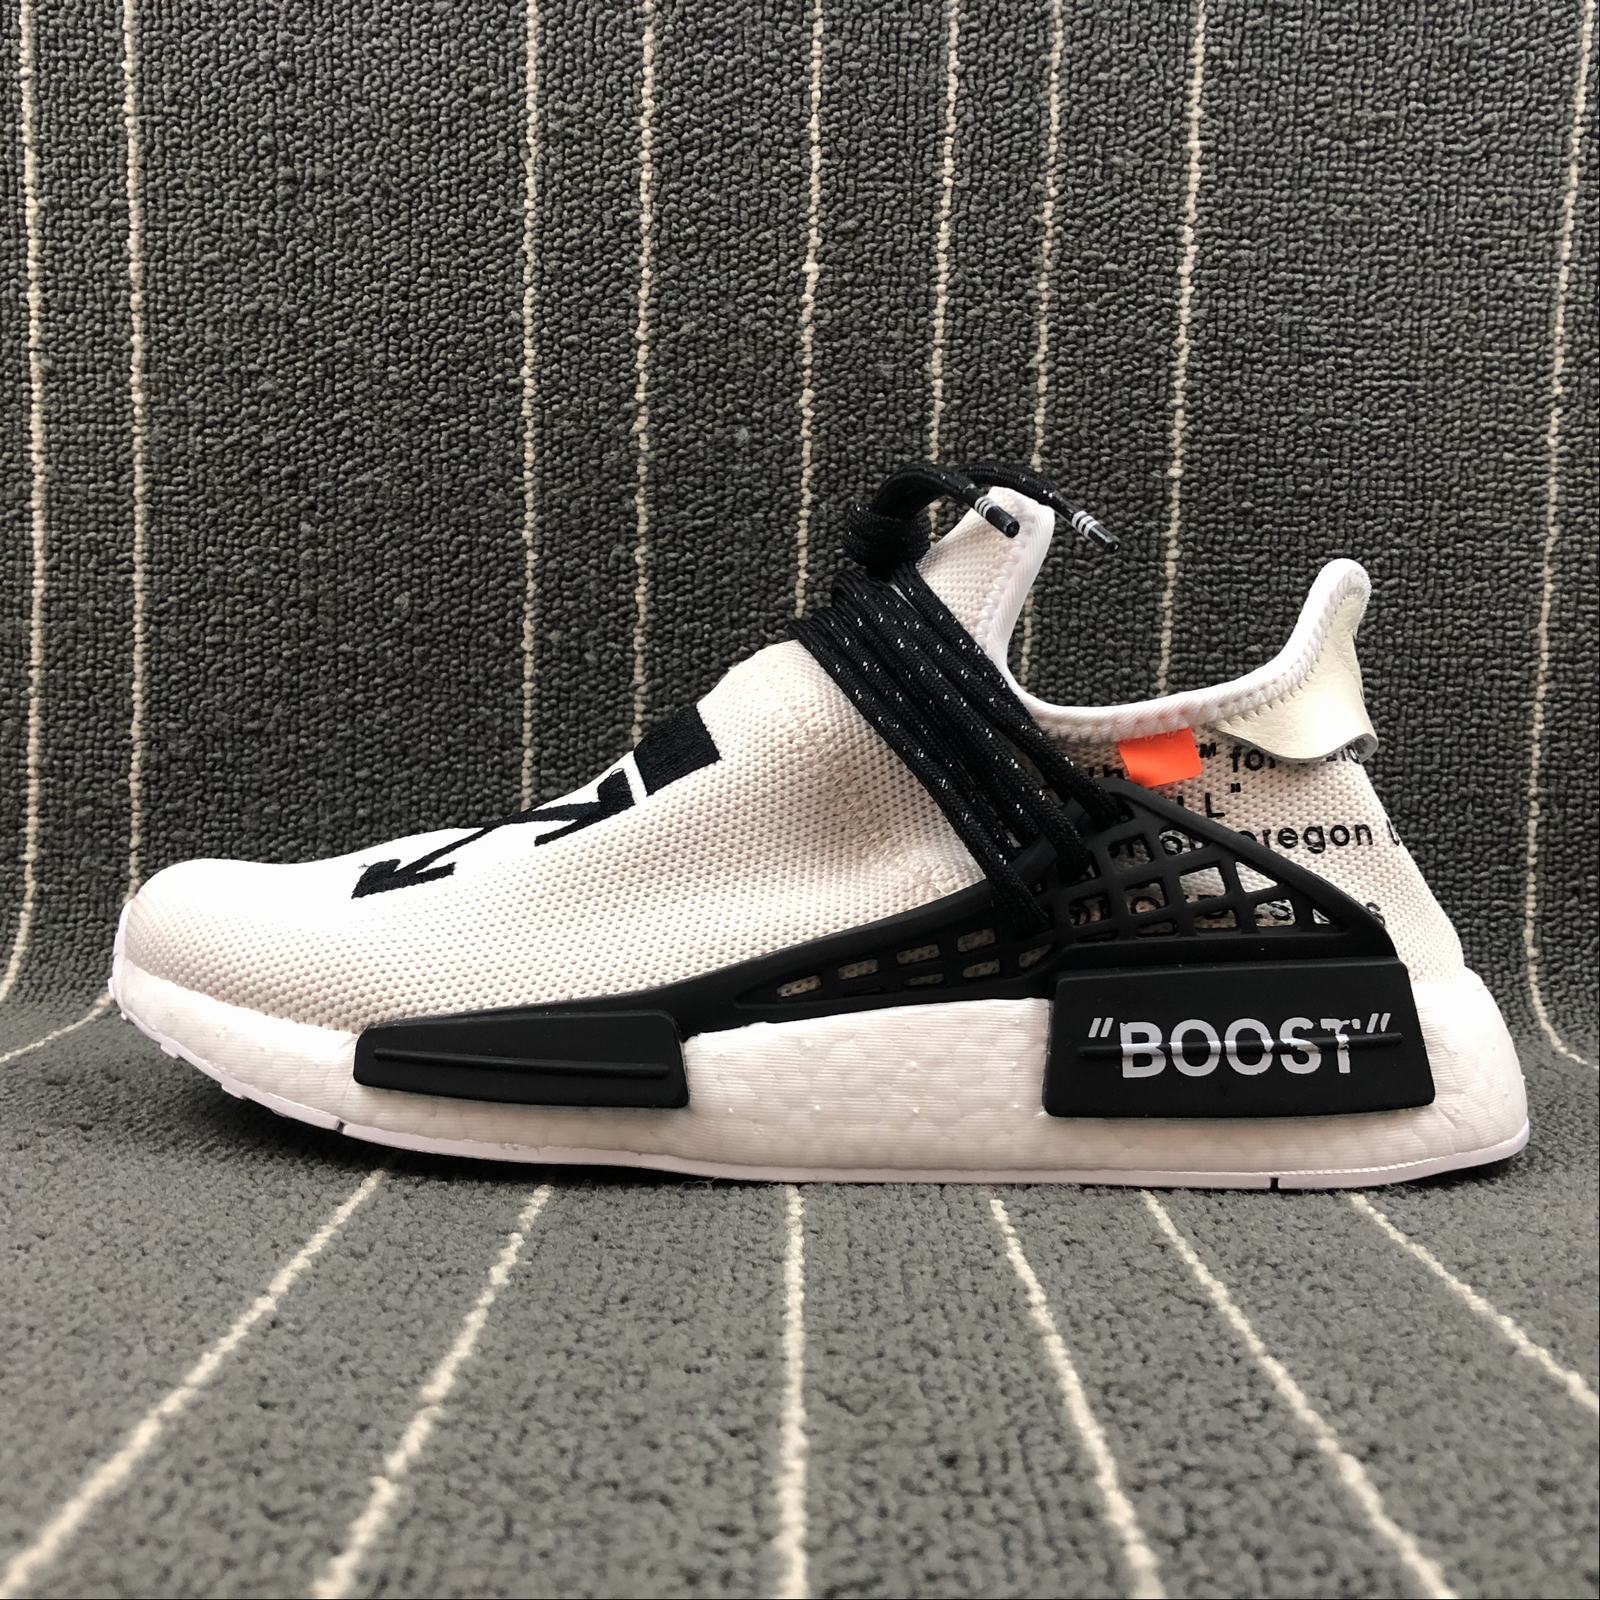 Off-White-x-adidas-NMD-Hu-Trail-For-Sale – The Sole Line